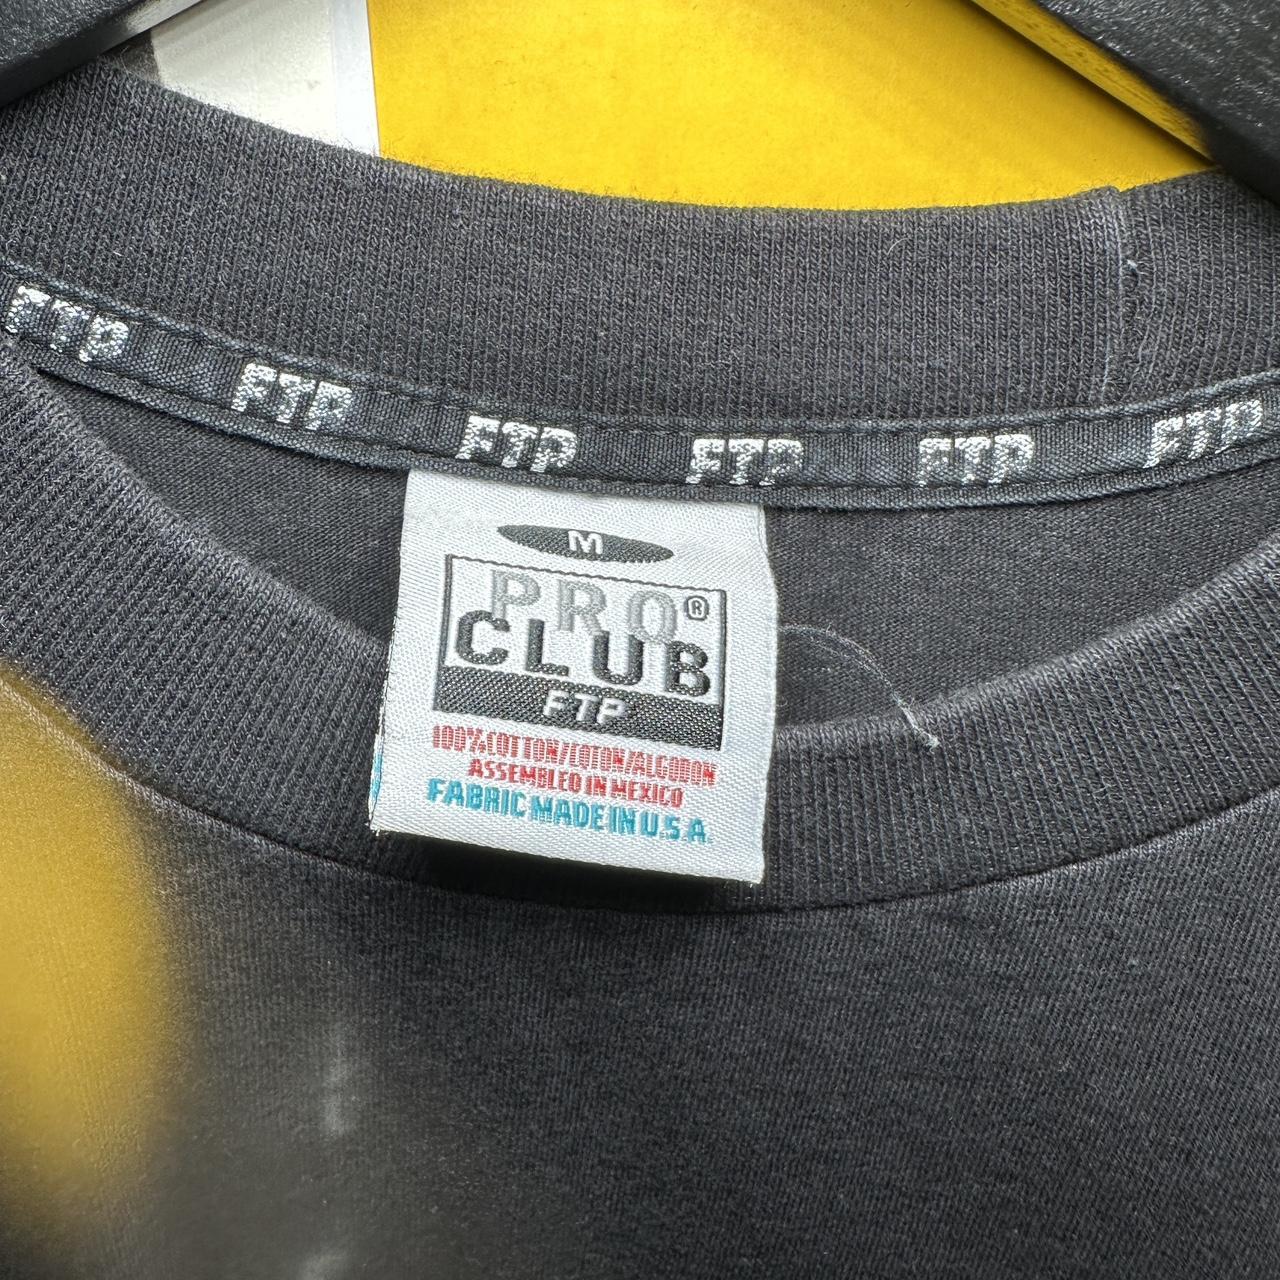 FTP Pro Club Boxers Condition: New Size: - Depop